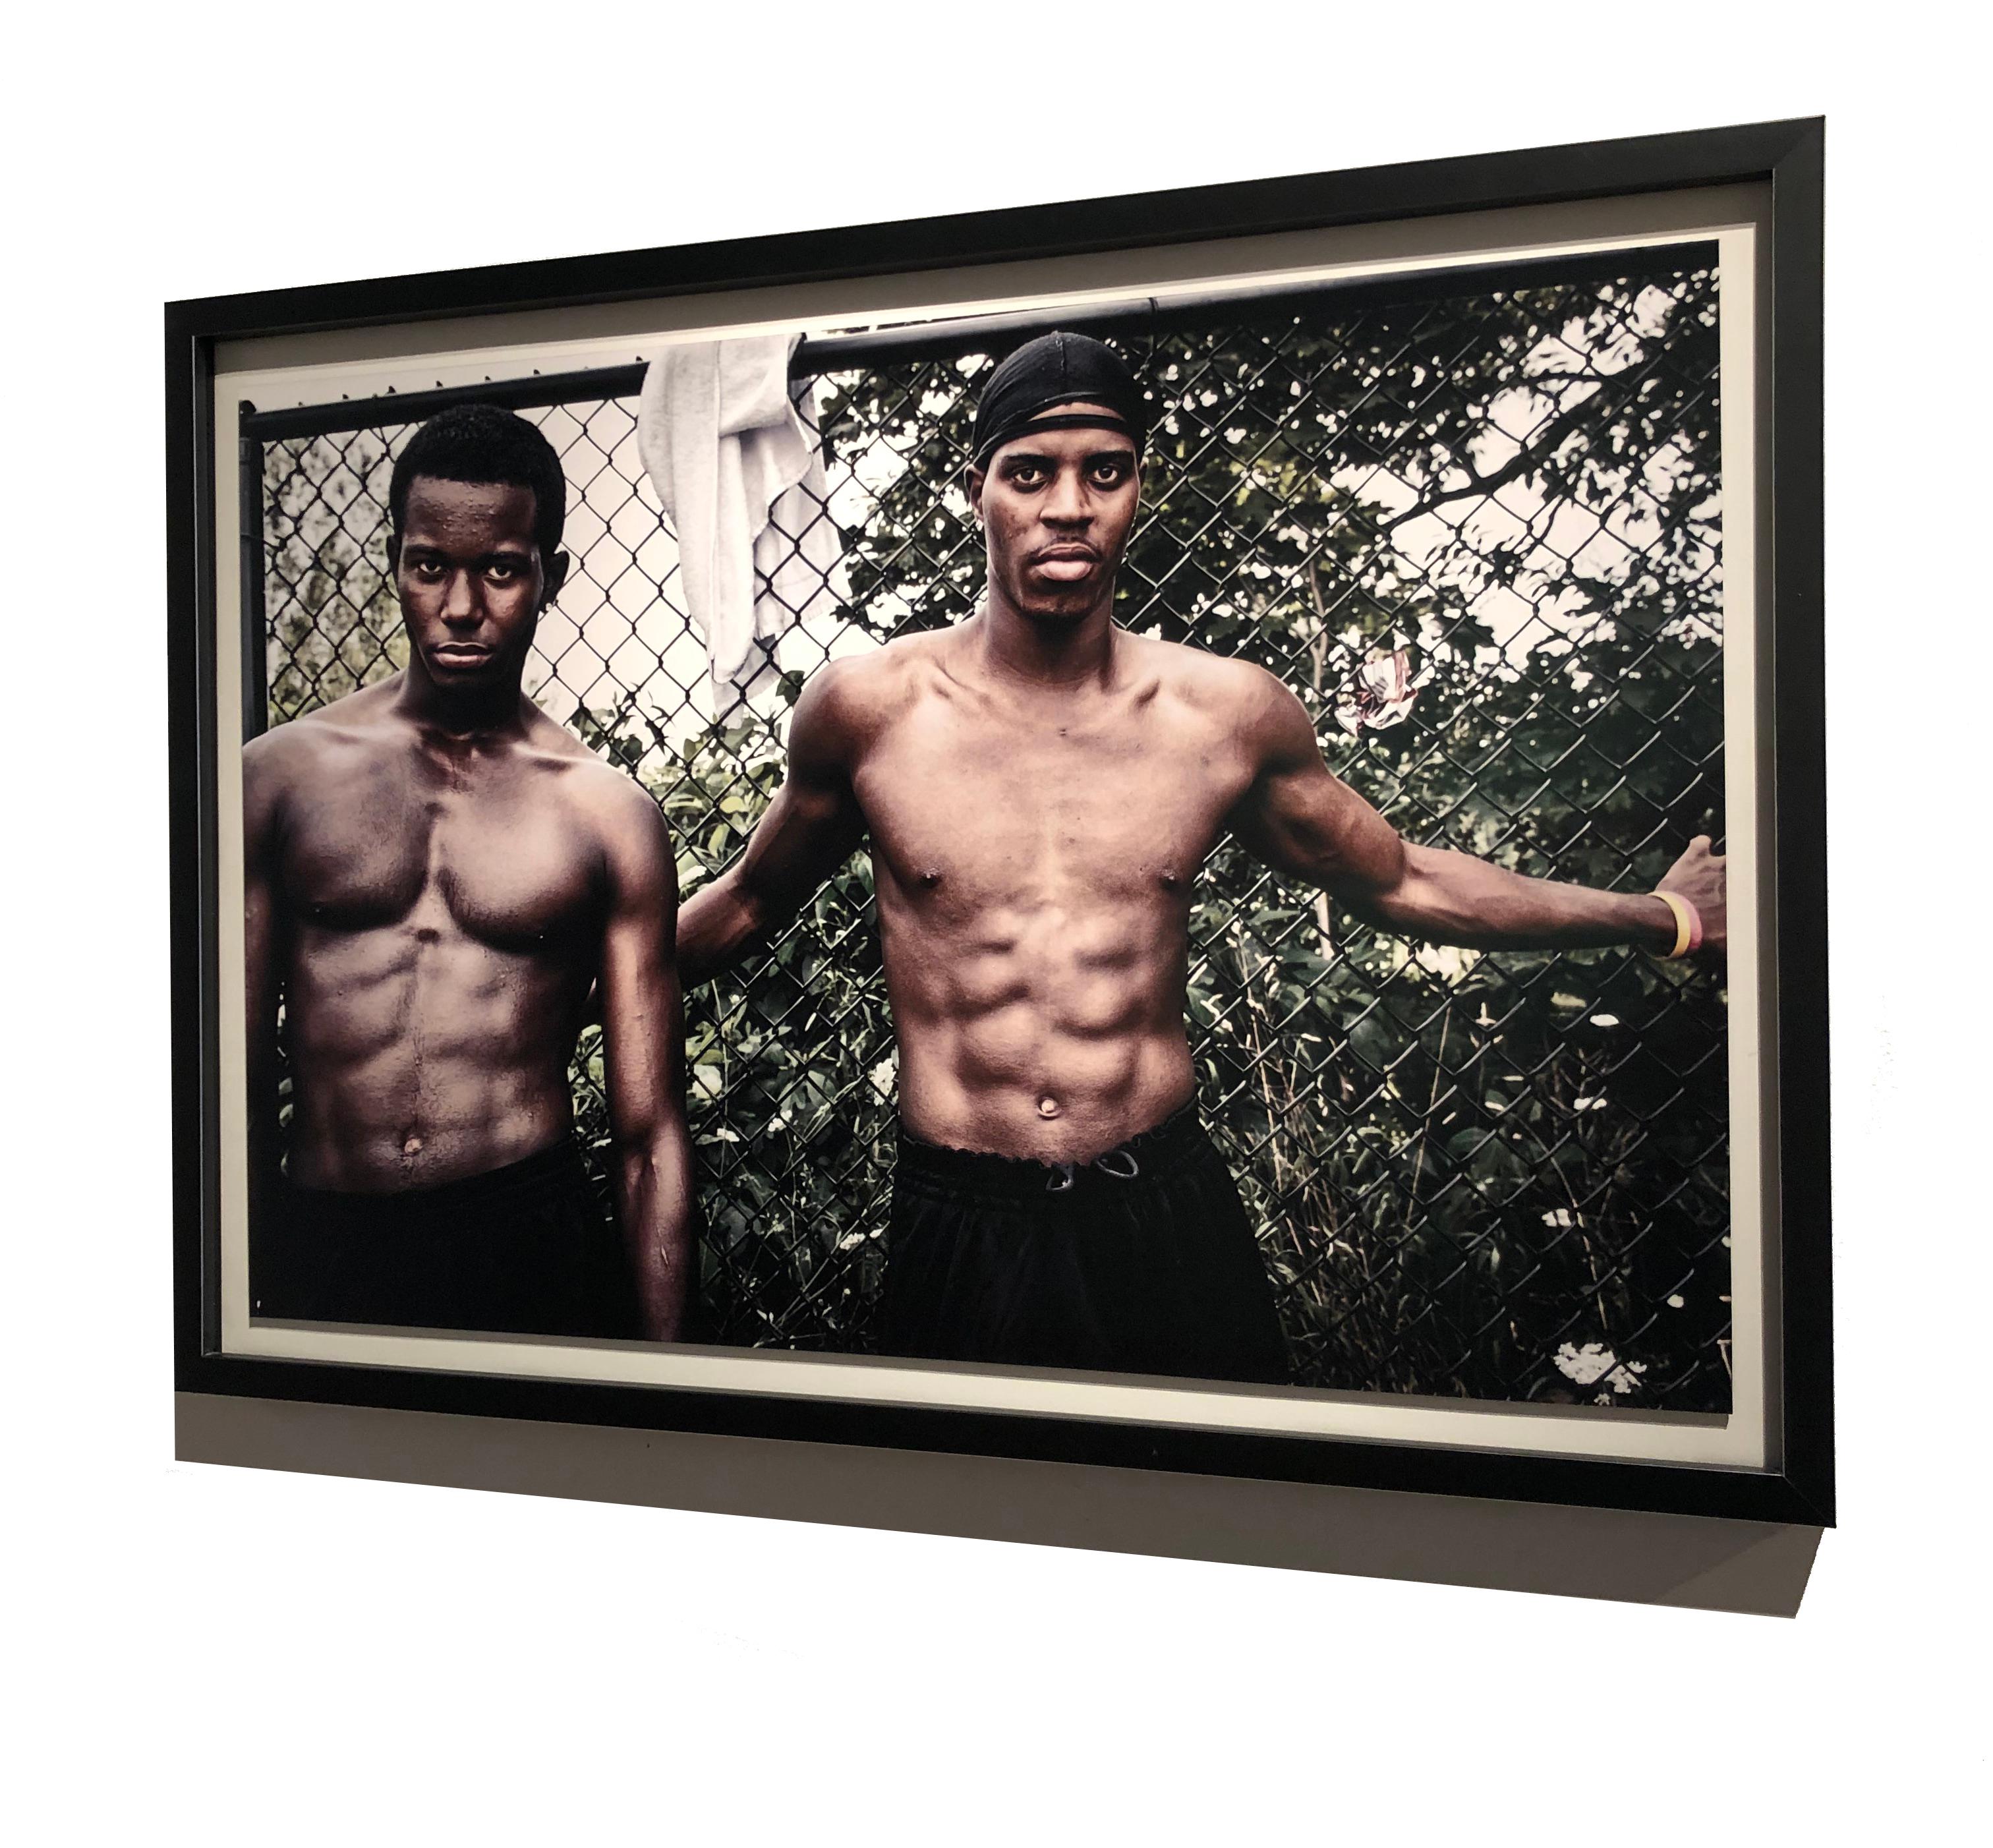 Street photography two young men, Ever Onward I, No. 22, C Print - Black Portrait Photograph by Tice Lerner